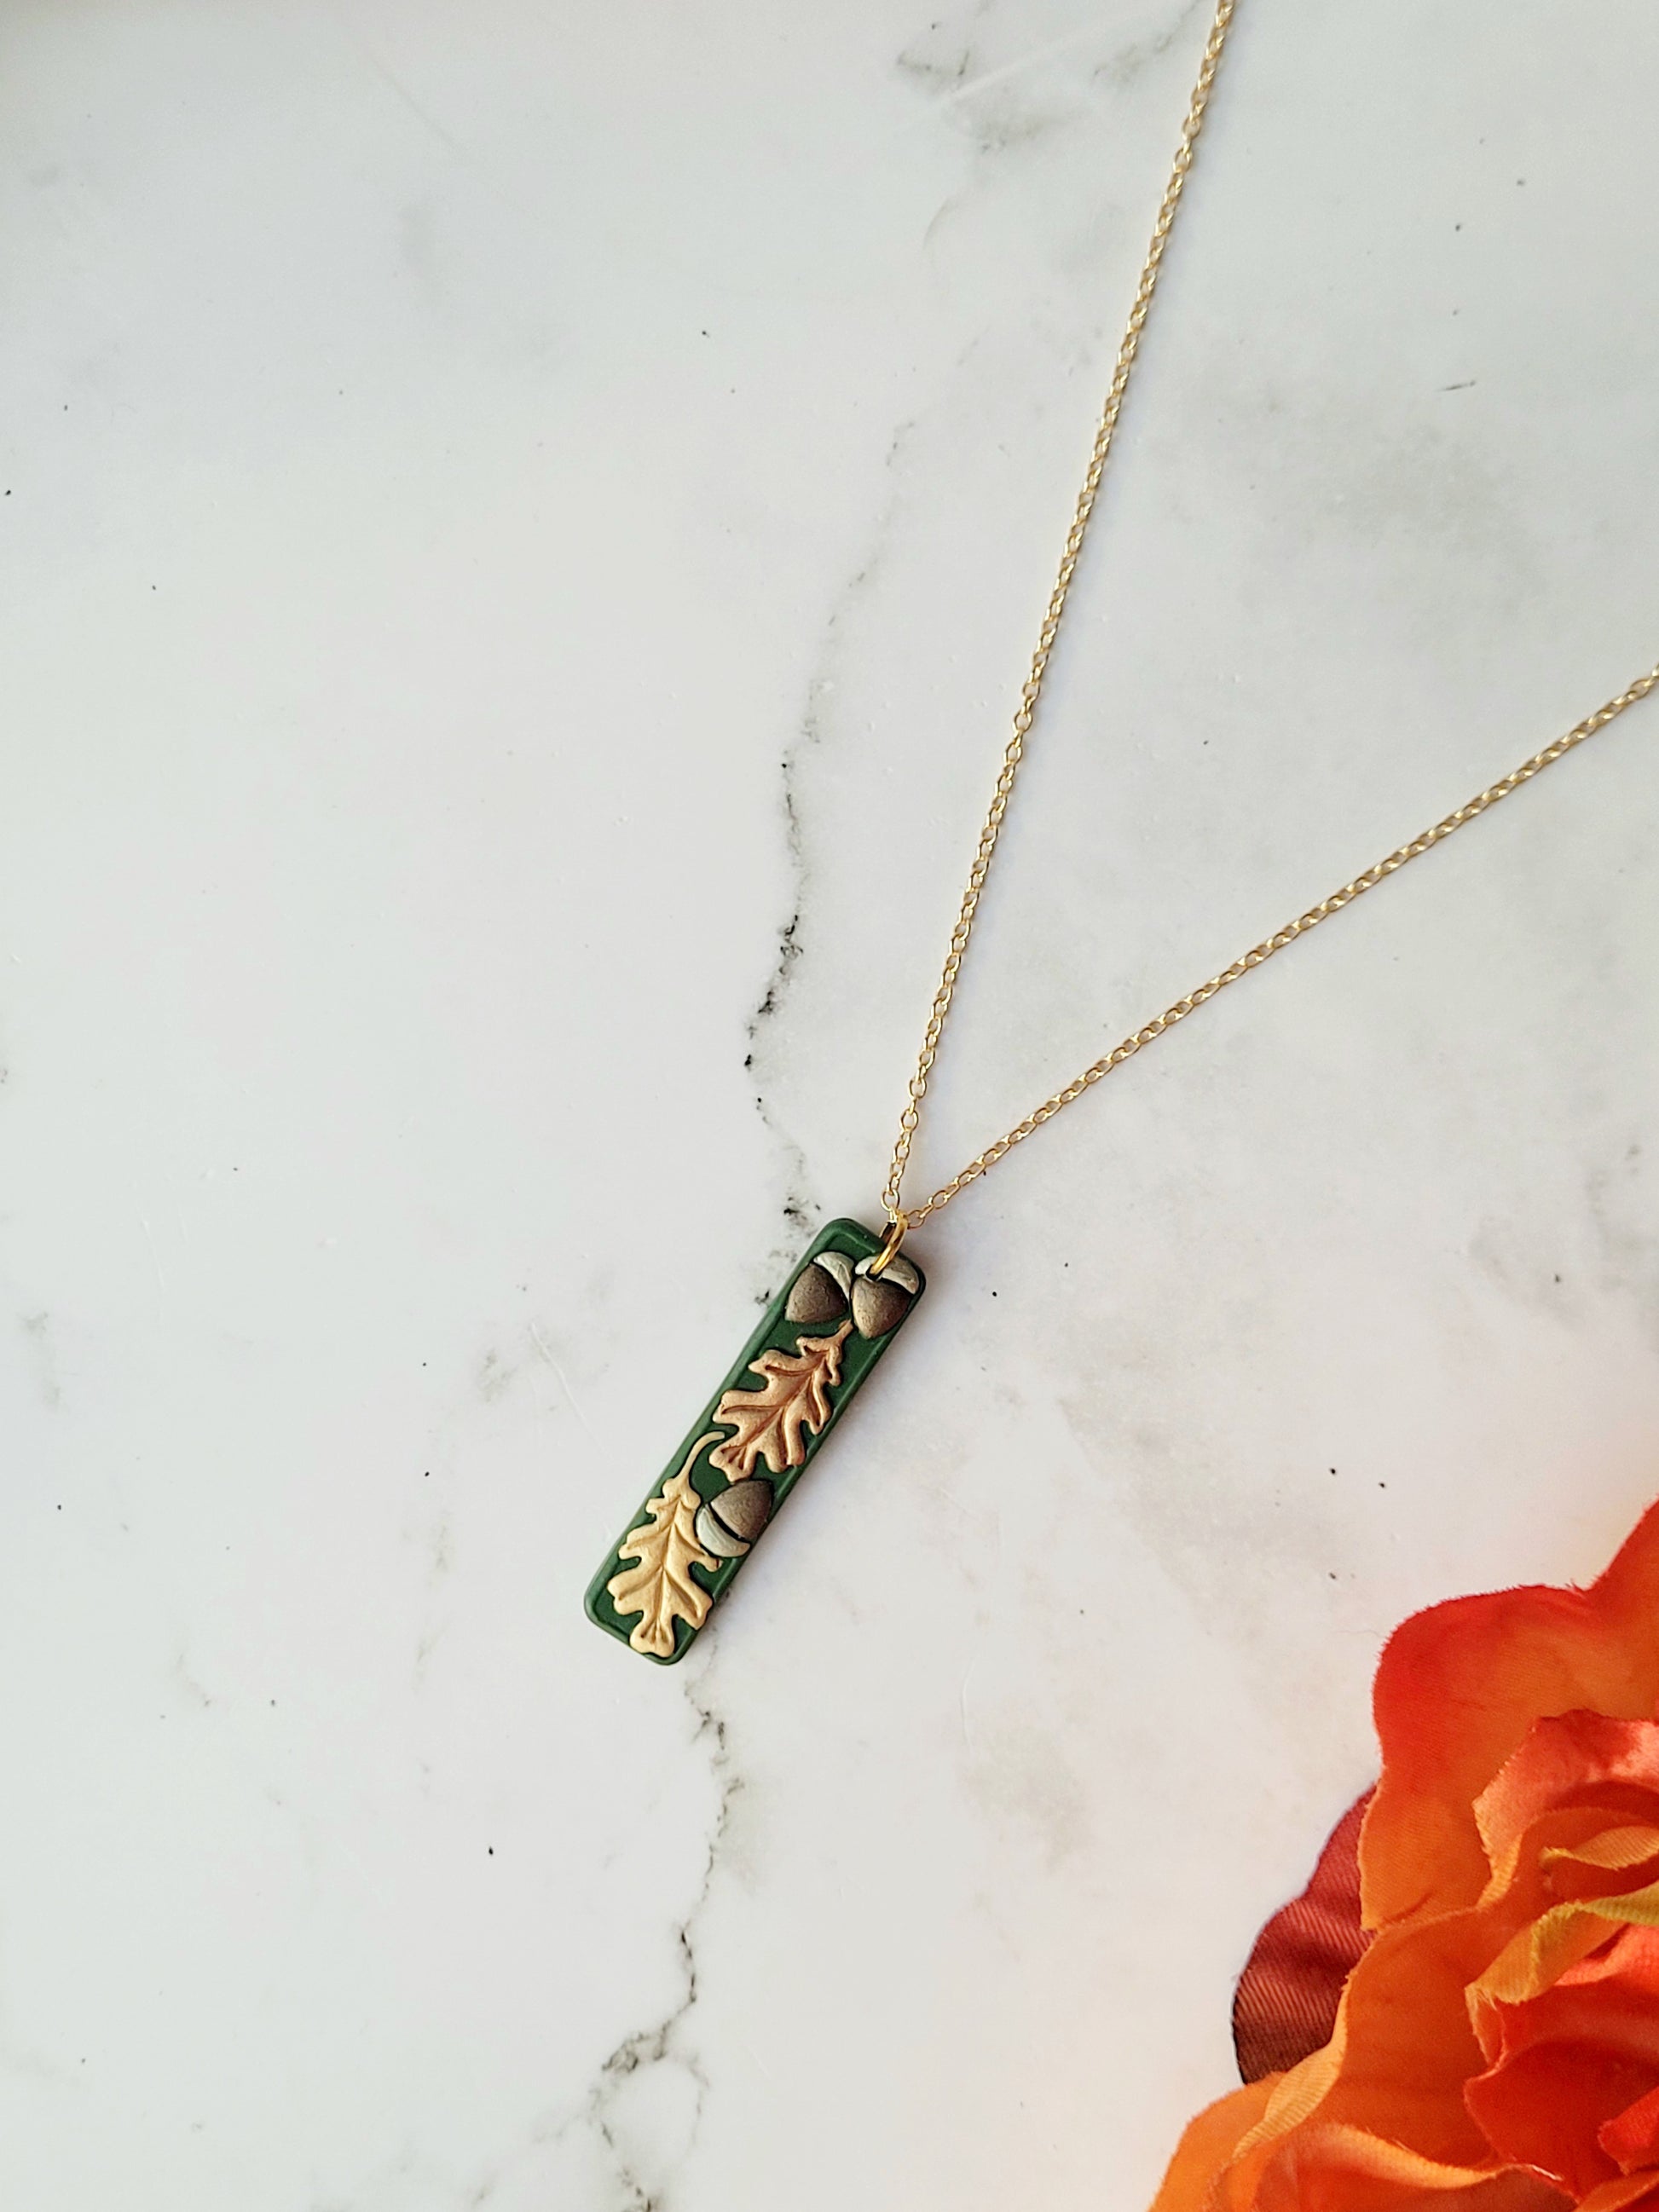 close up of the Green bar shaped pendant with metallic acorns and oak leaves.